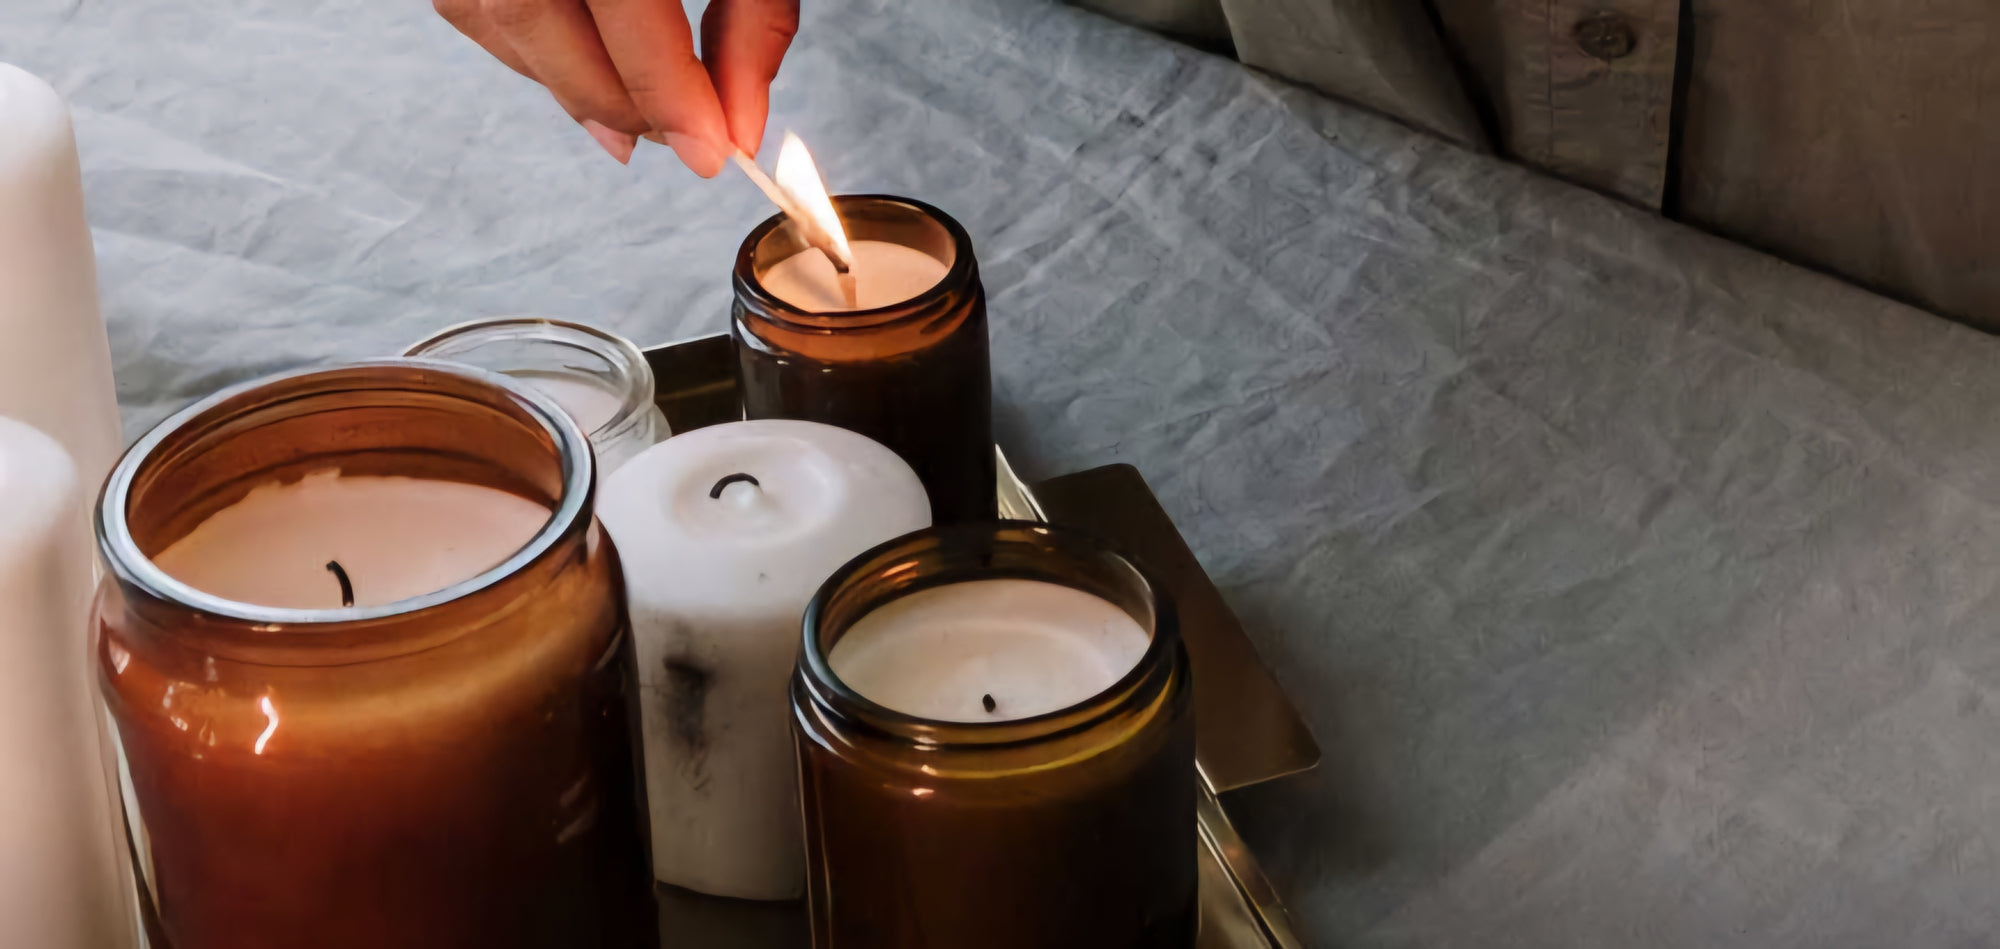 The 10 Best Scents for Candles in 2023 - FlamingWick Candle Shop